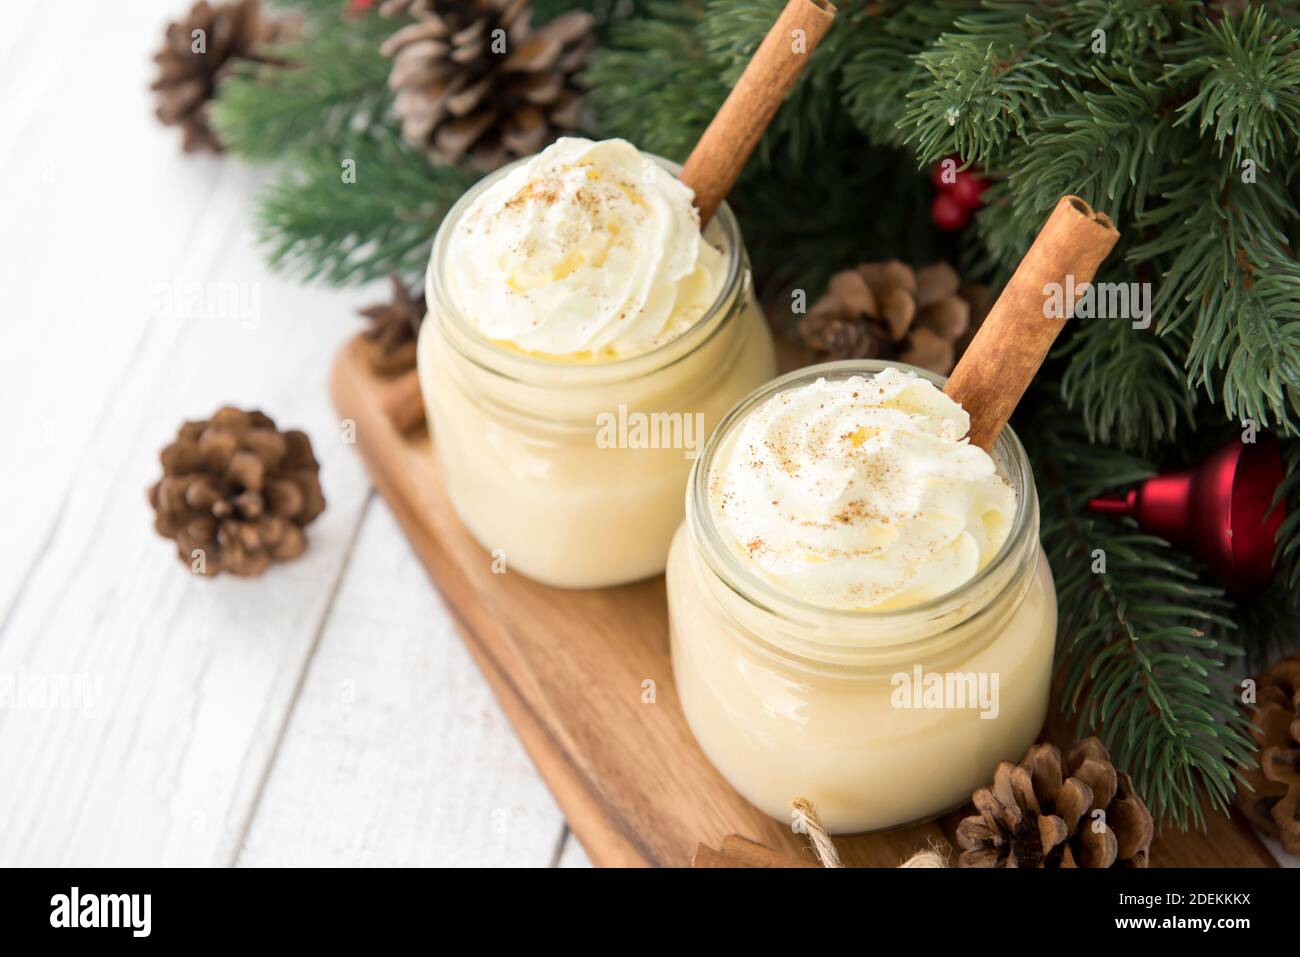 Traditional Christmas eggnog drinks with whipped cream, ground nutmeg, cinnamon and decorating items on wood table, preparing for celebrating festive Stock Photo